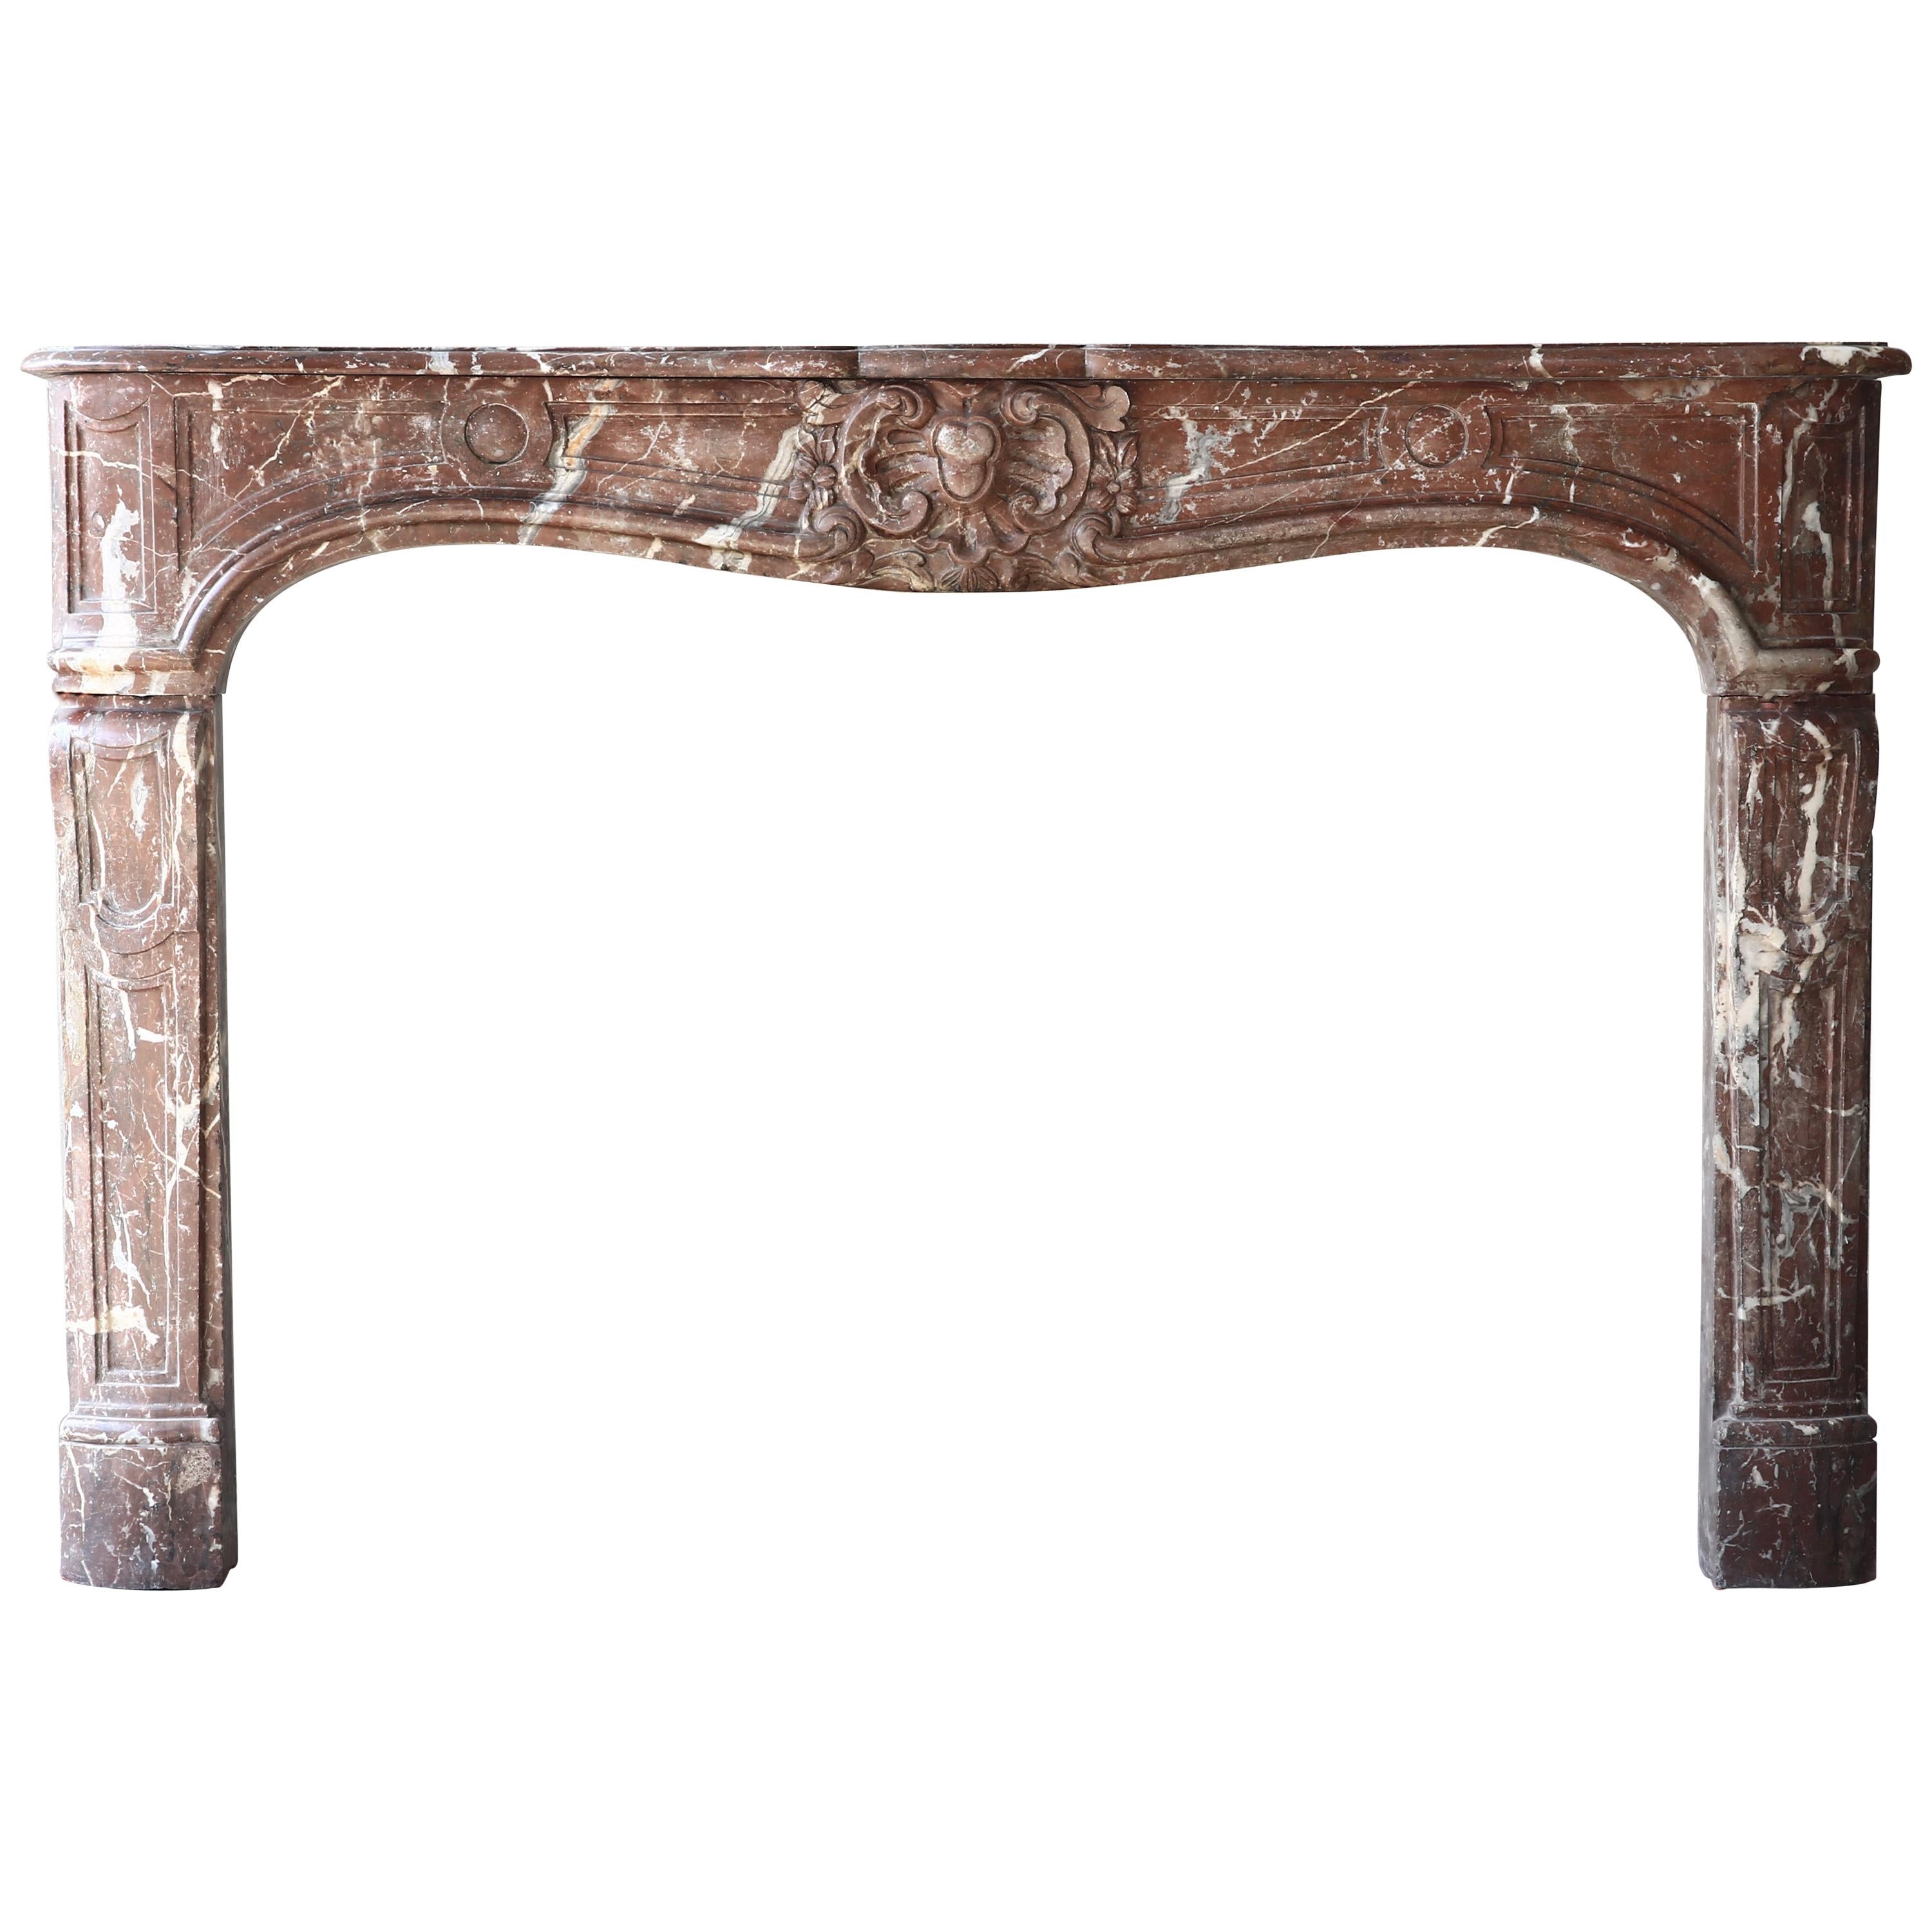 Antique Mantel Piece of Rouge Royal Marble in Style of Louis XV